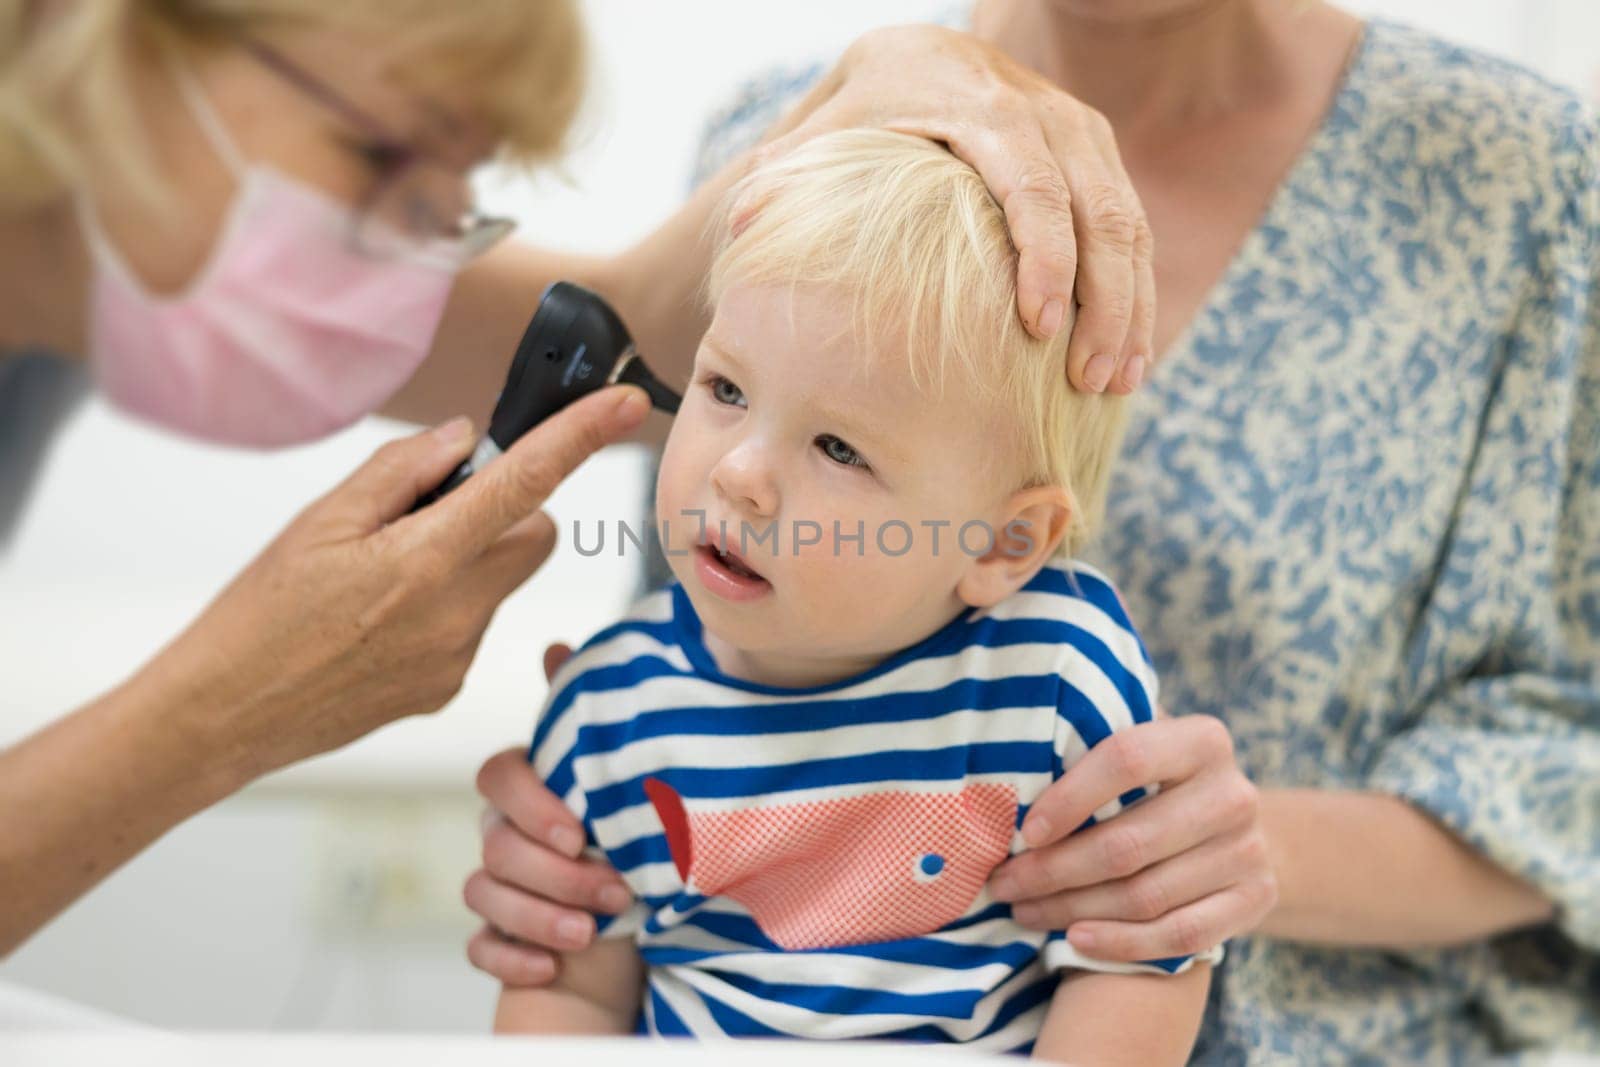 Infant baby boy child being examined by his pediatrician doctor during a standard medical checkup in presence and comfort of his mother. National public health and childs care care koncept